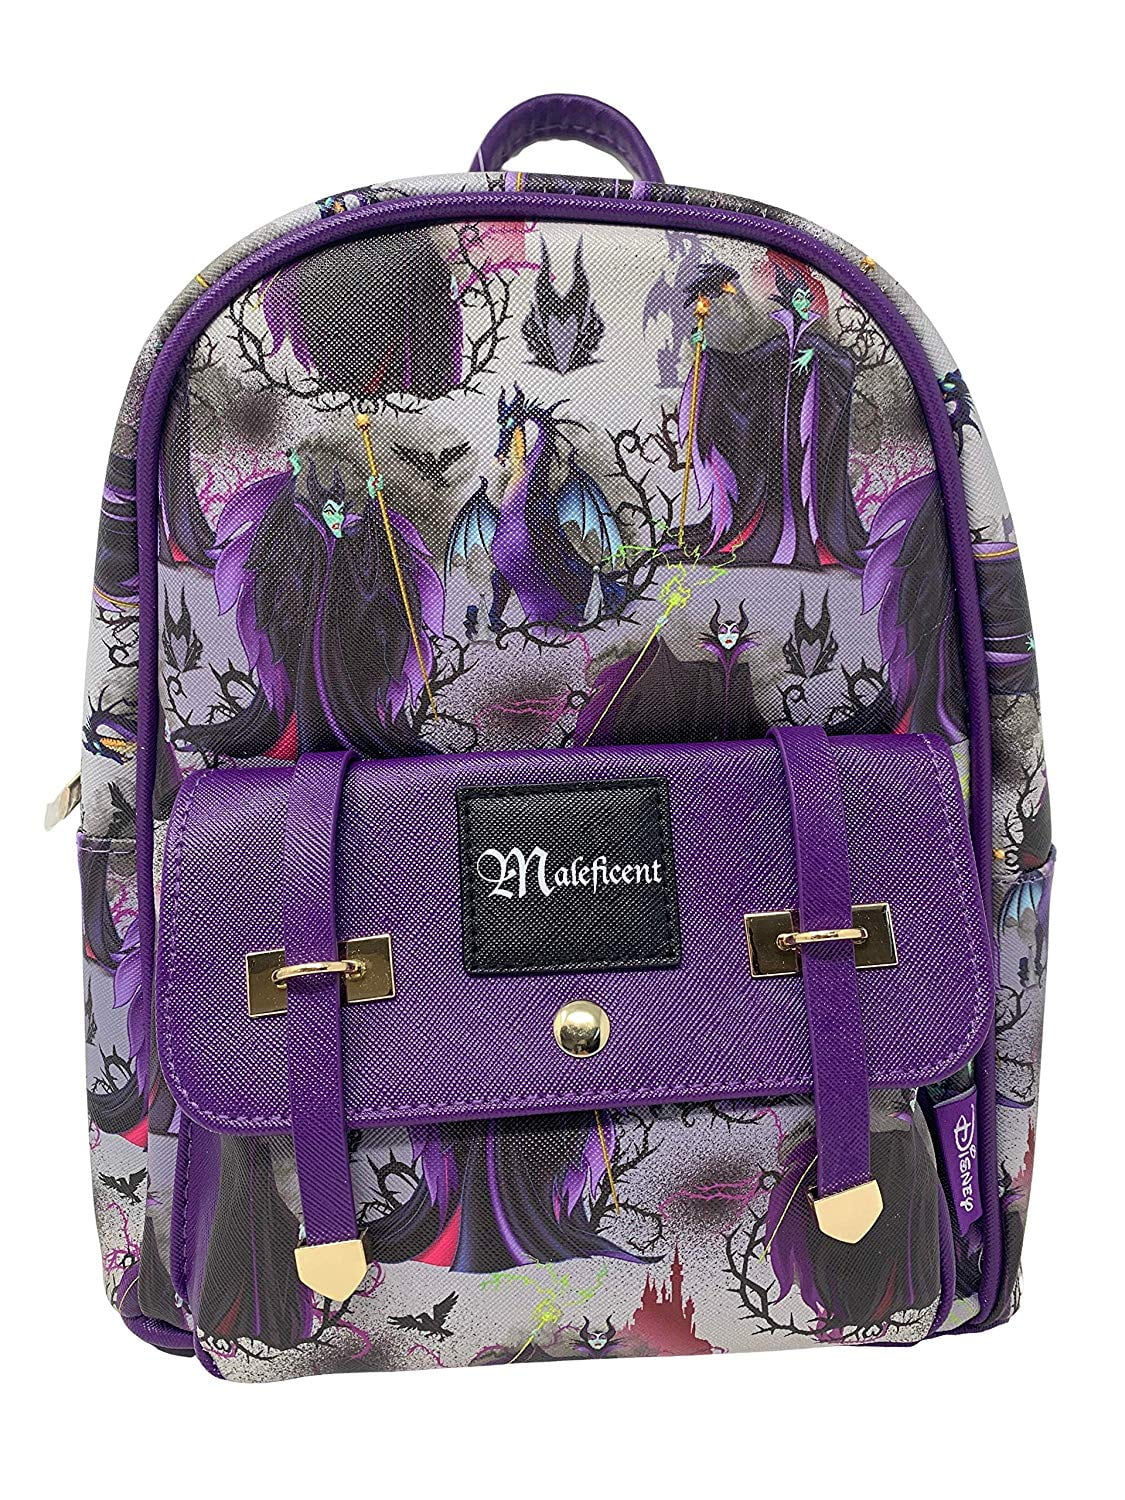 Licensed Disney's Villains Maleficent 11" Faux Leather